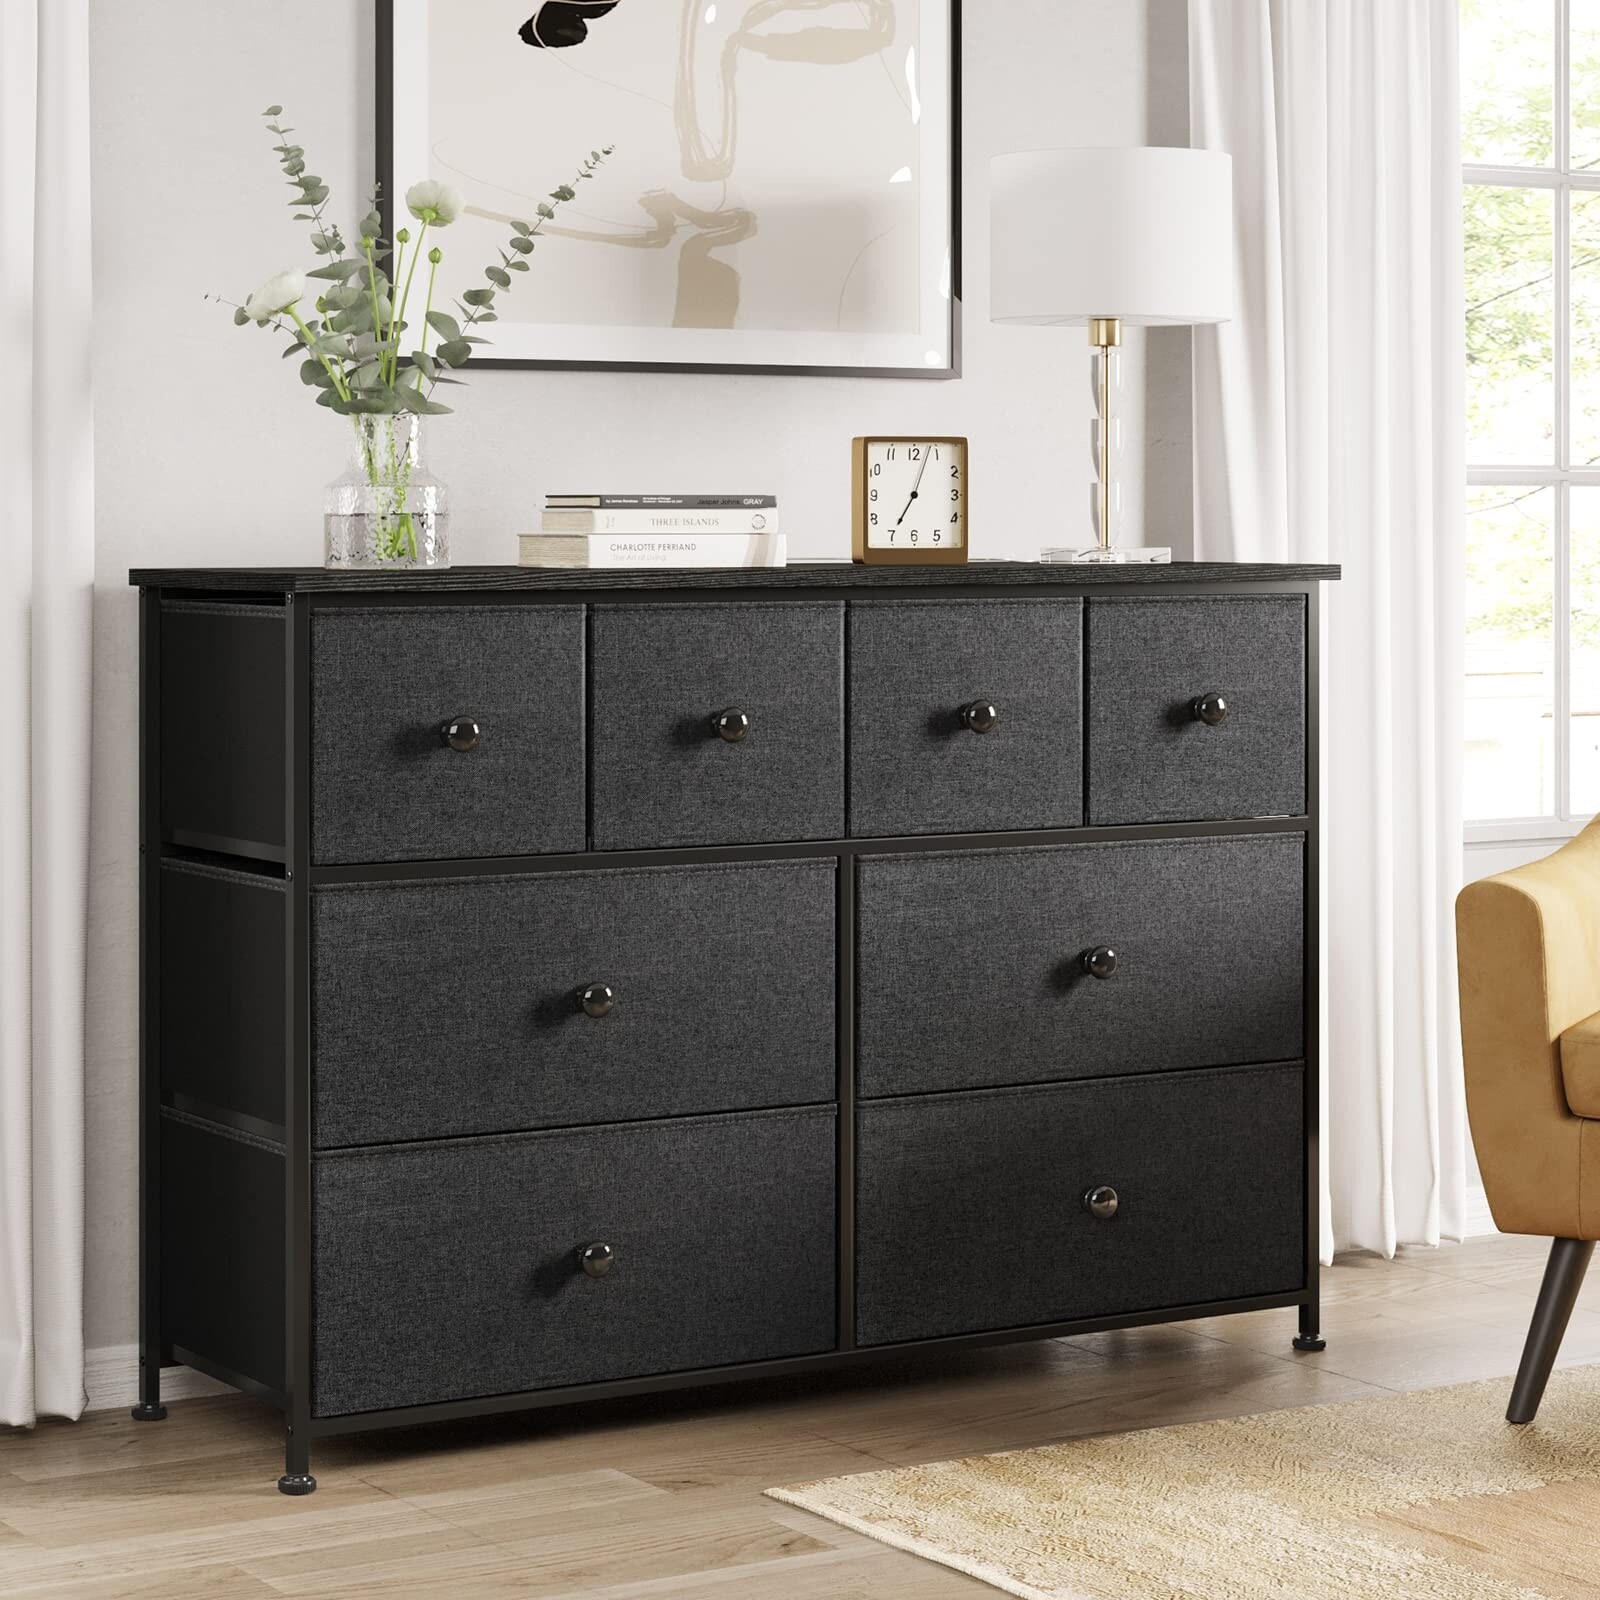 https://ak1.ostkcdn.com/images/products/is/images/direct/d3c728900f67660acb49403f0ef6af6c3c6f77d8/8-Drawer-Dresser-for-Bedroom-Chest-of-Drawers-Closets-Storage-Units-Organizer-Large-Capacity-Steel-Frame.jpg